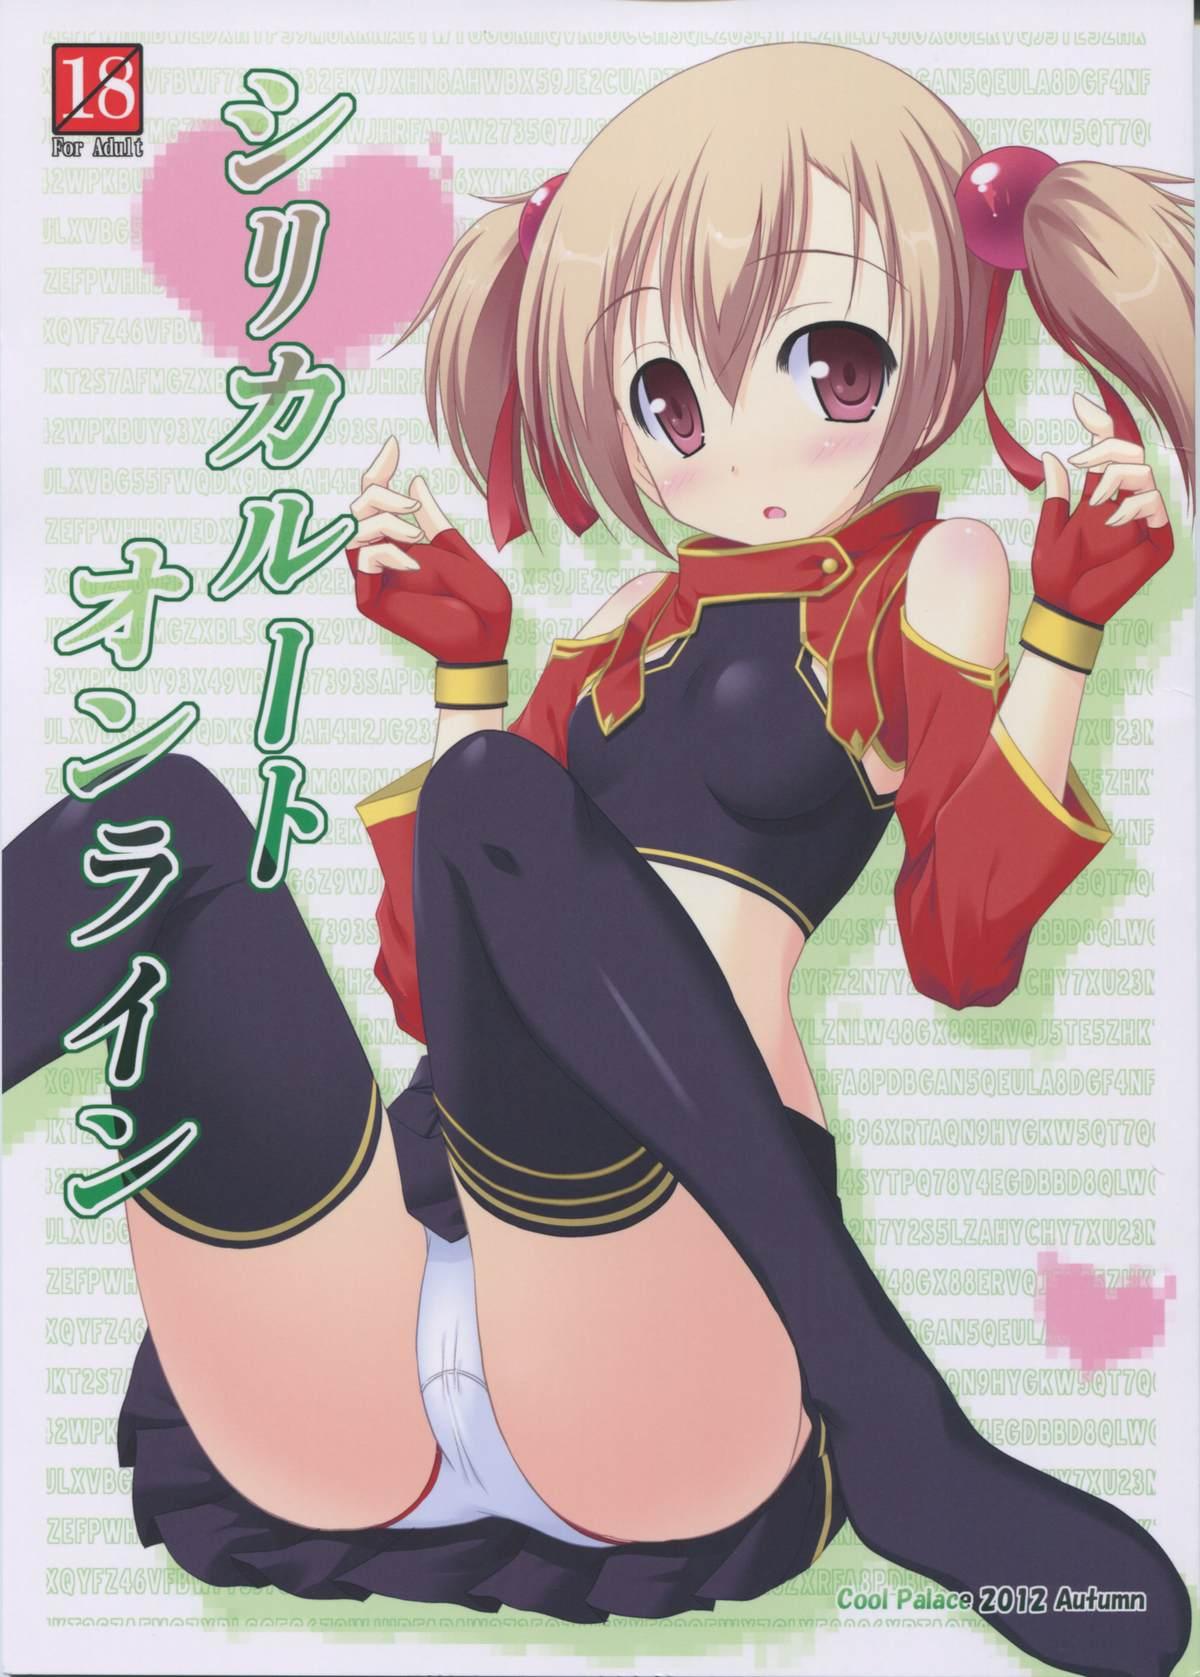 Play Silica Route Online - Sword art online Hardcoresex - Picture 1